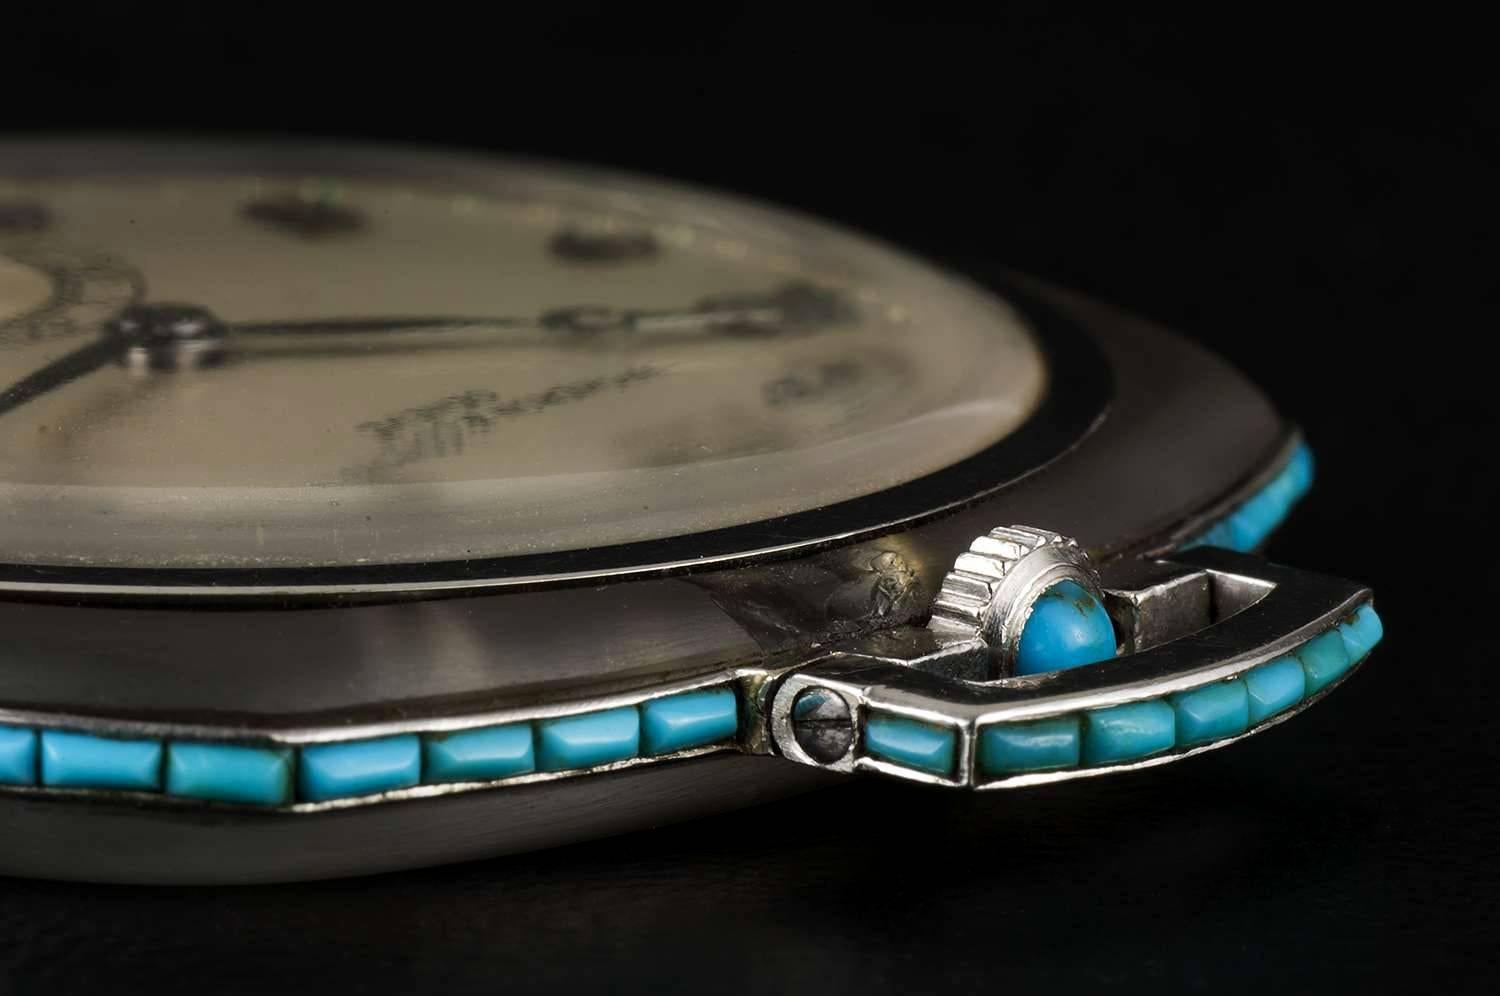 This is a fine rare square shape pocket watch made of Gold, Rock Crystal, and with a turquoise surround, silver dial with arabic numbers, small seconds at 6 0'clock and breguet style moon hands, the winding crown is set with a cabochon turquoise,